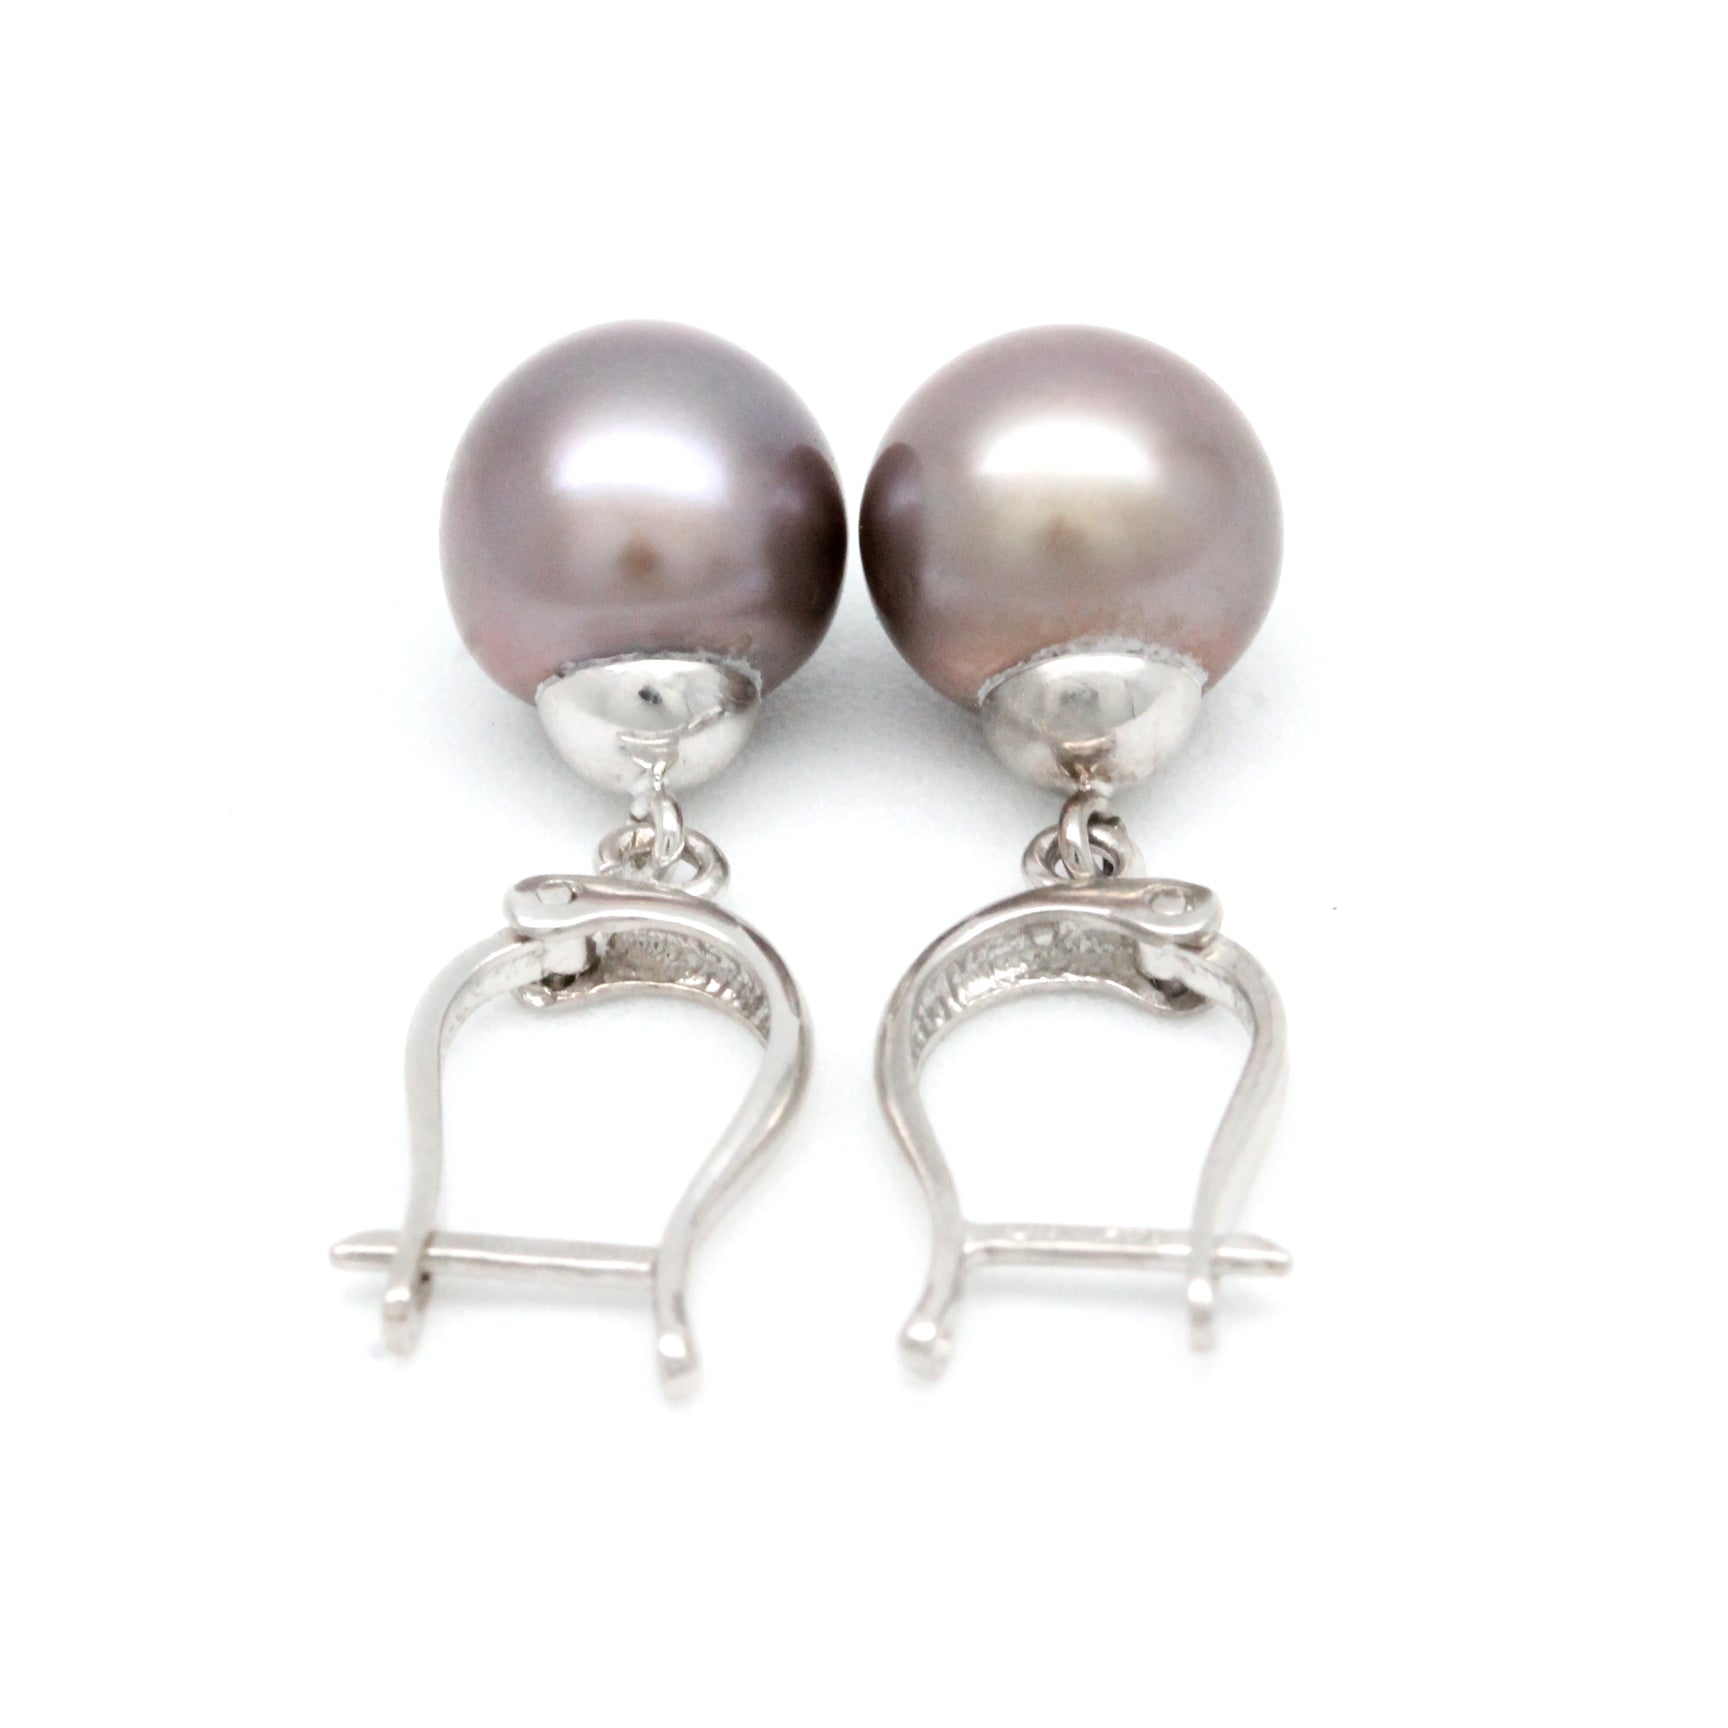 "Lyre" 14K White Gold Earrings with Cortez Pearls